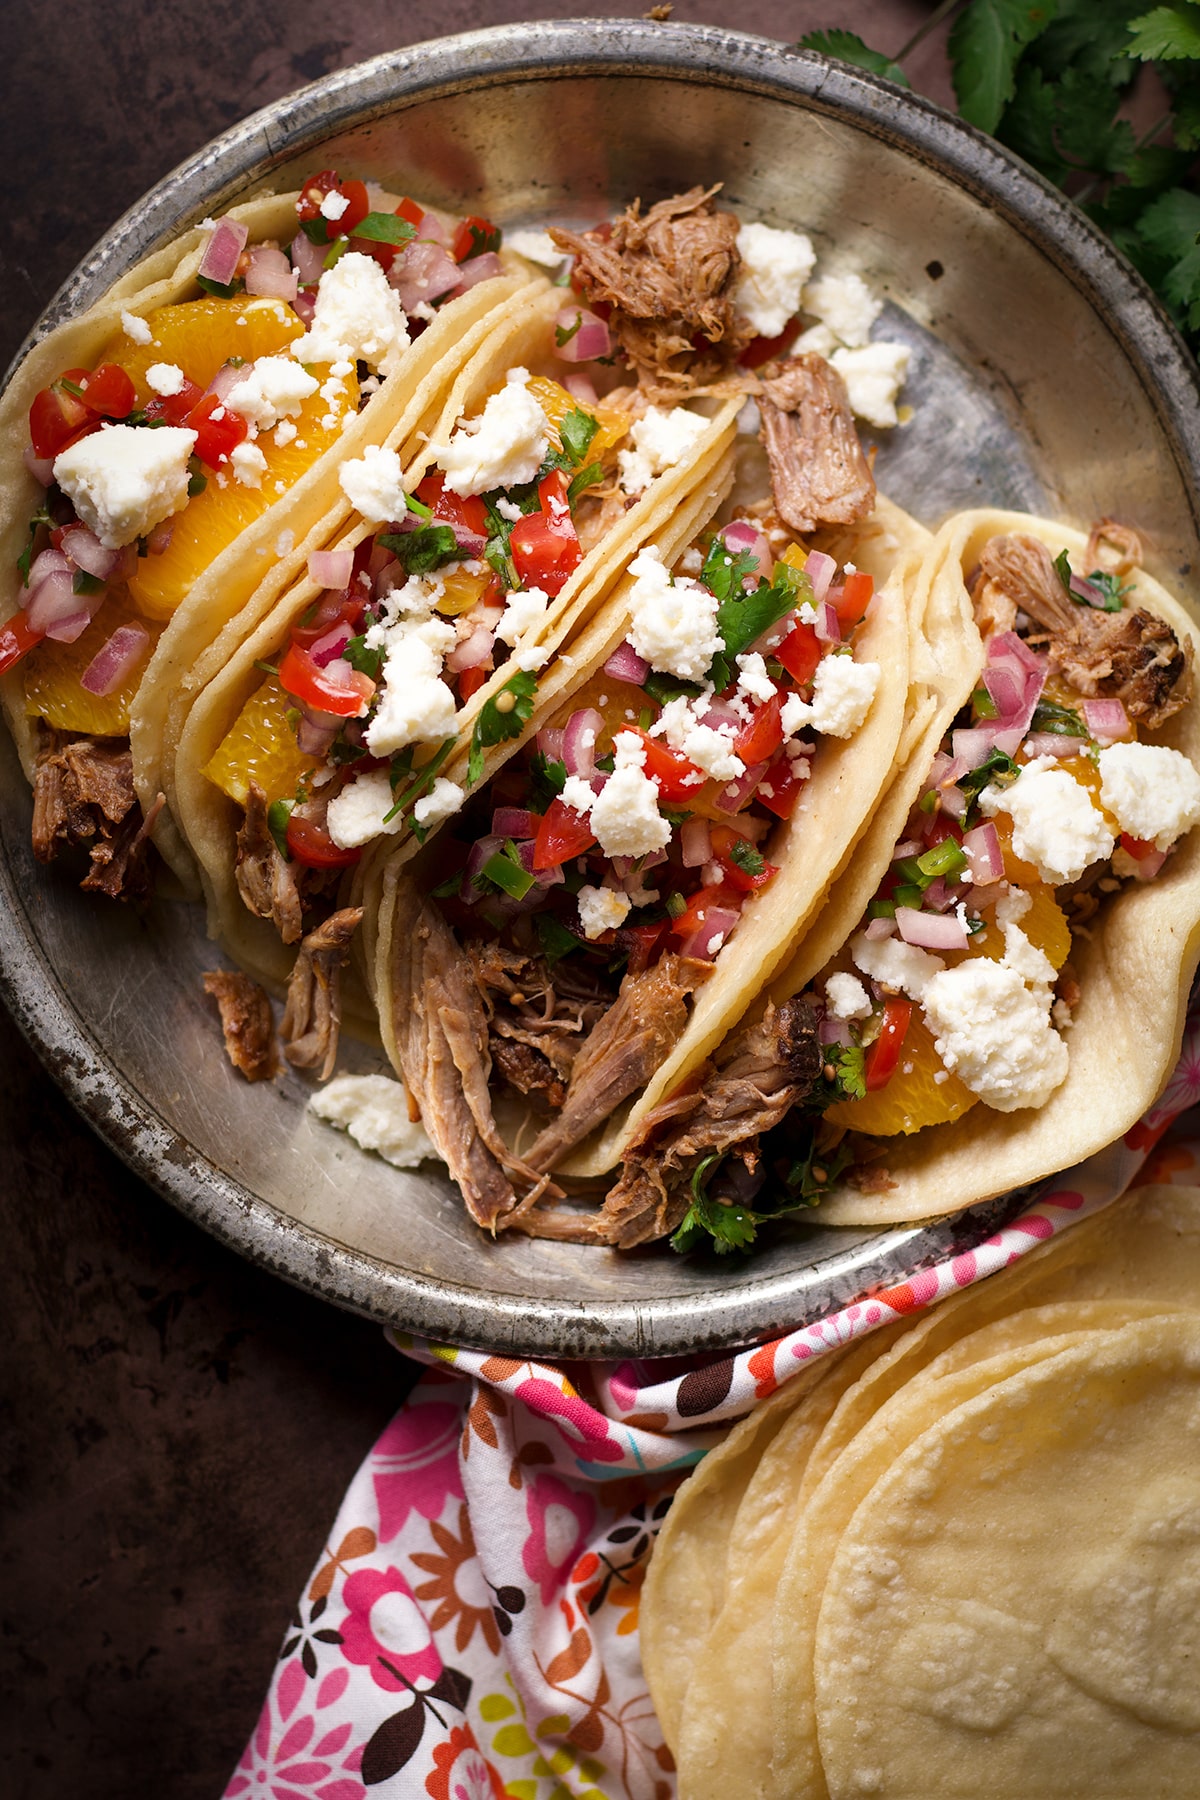 Four shredded pork tacos with orange slices, pico de gallo, and crumbled queso fresco on a tin plate.